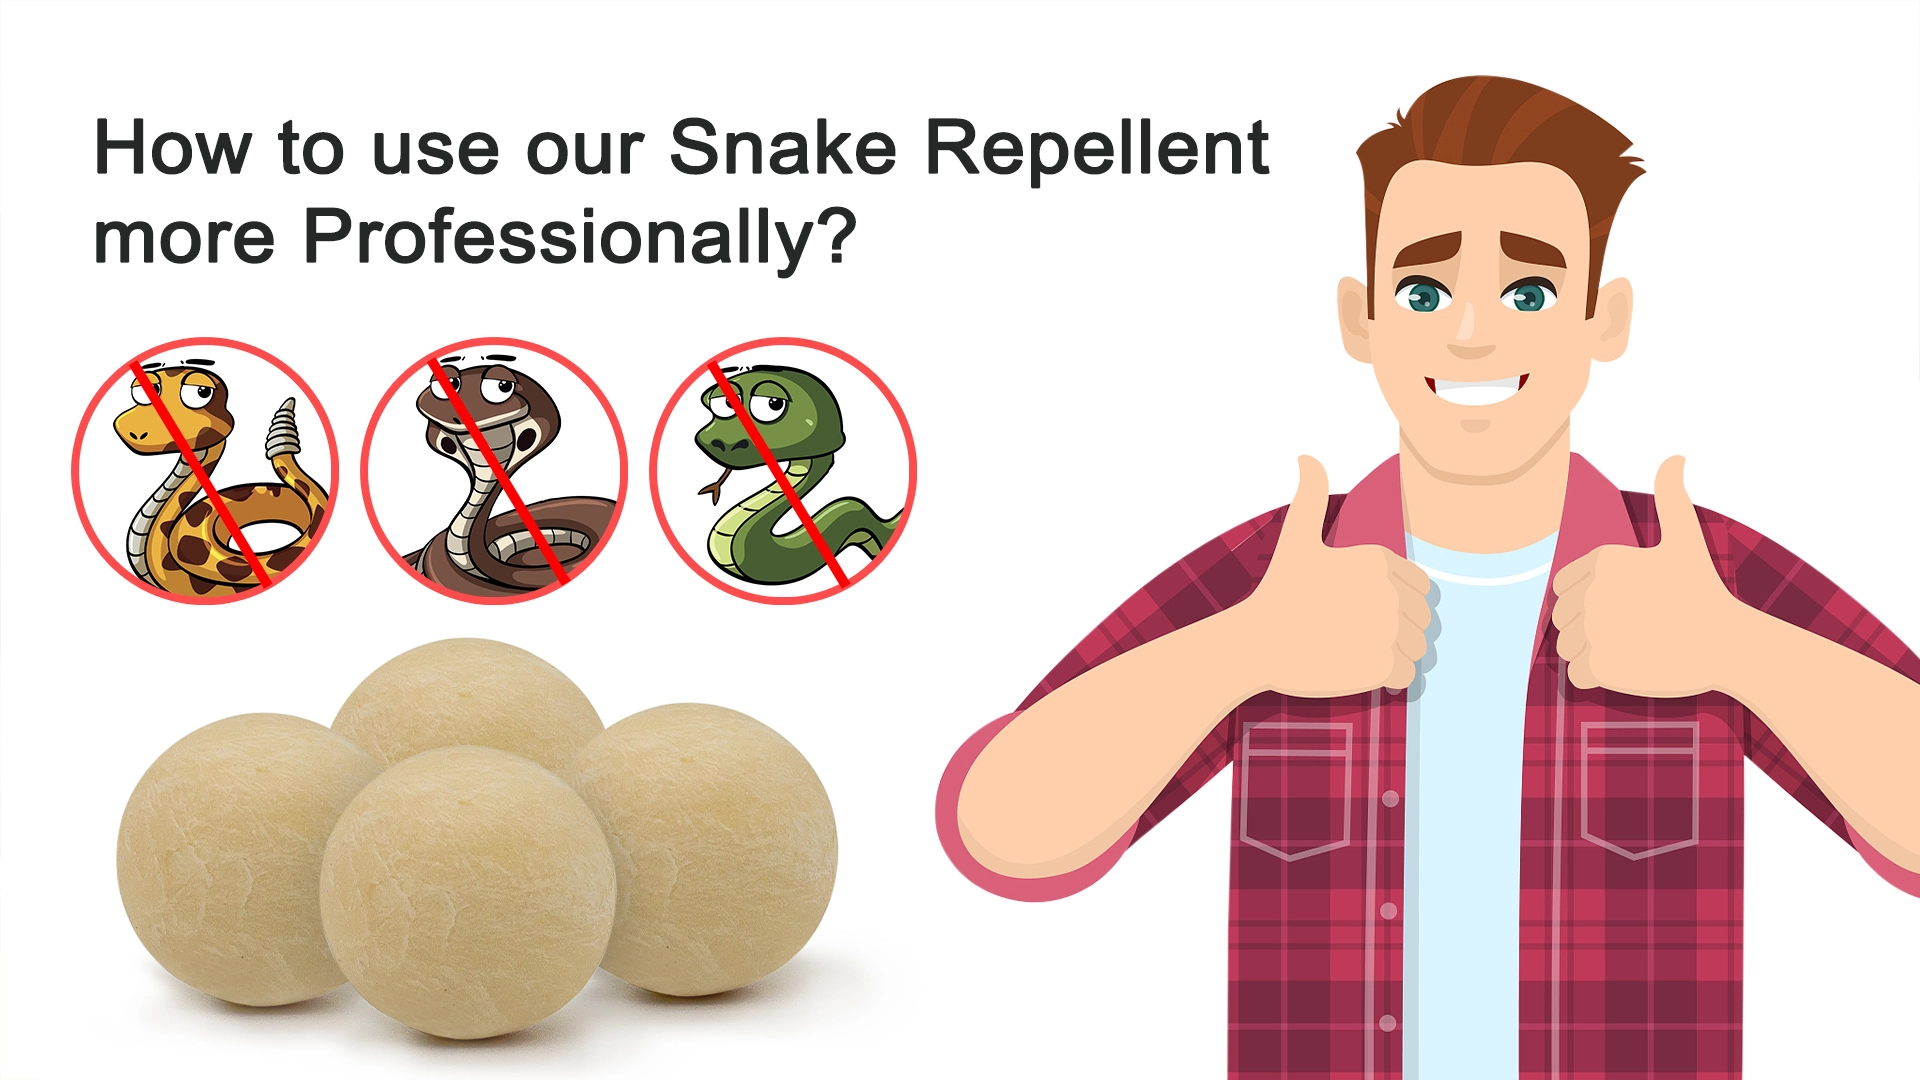 How to use Snake Repellent Balls more professionally?